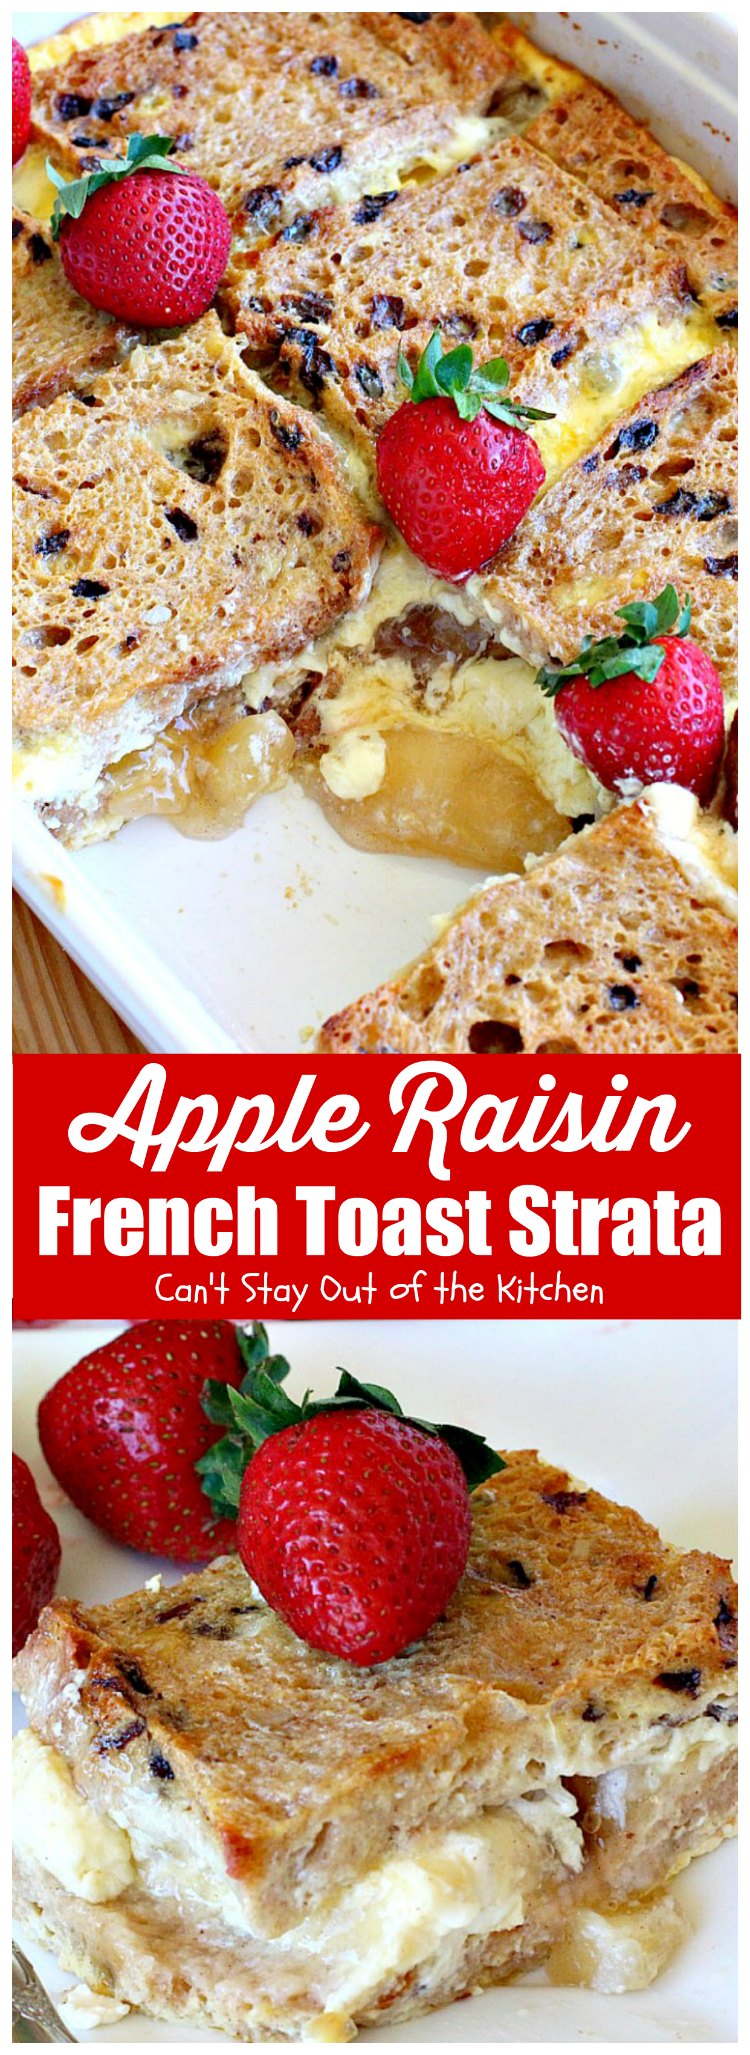 Apple Raisin French Toast Strata | Can't Stay Out of the Kitchen